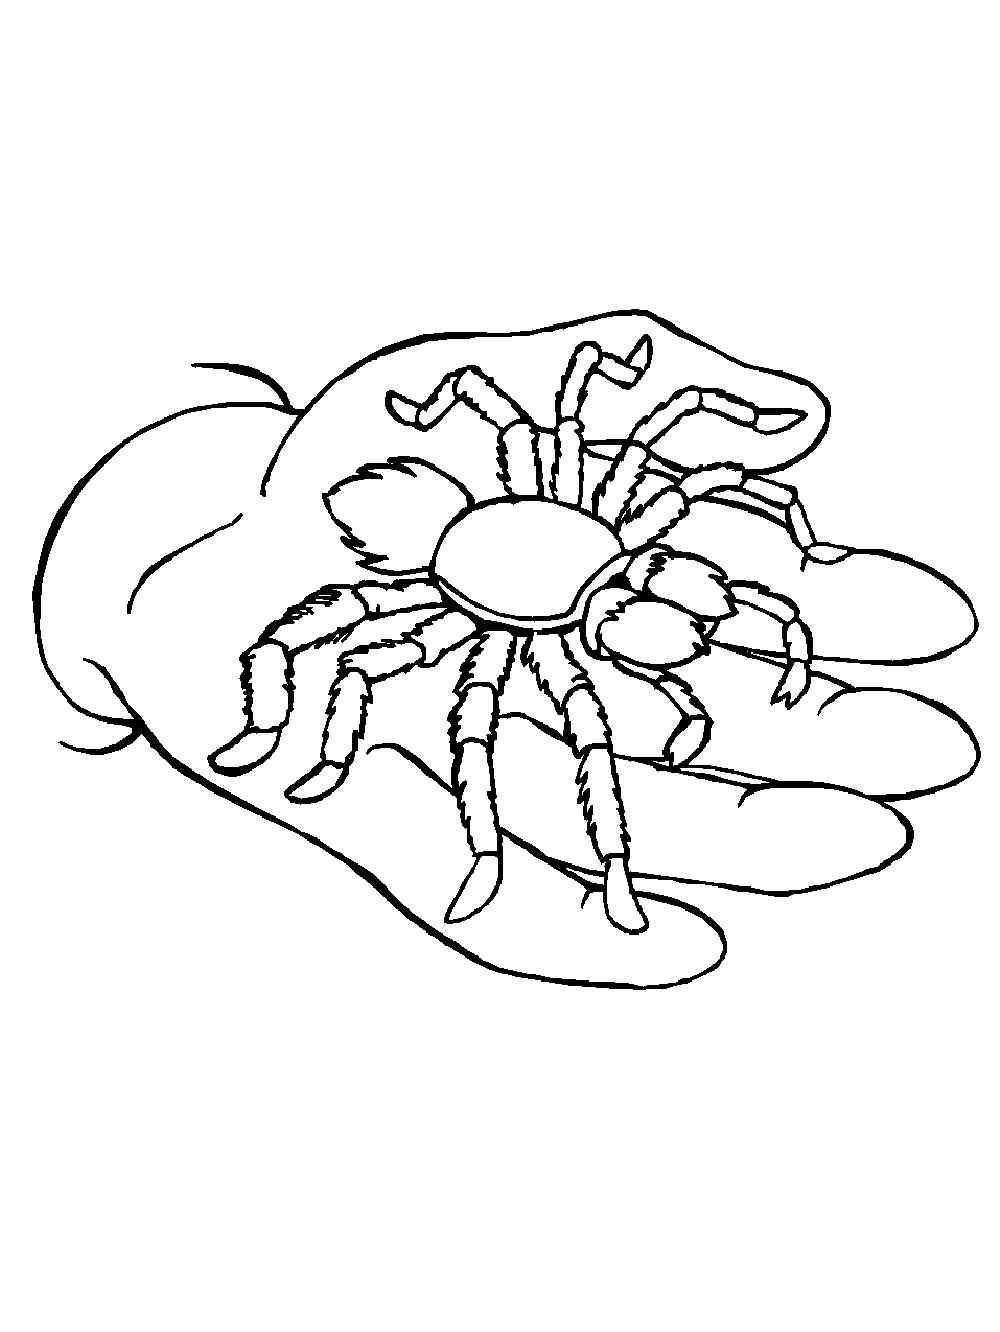 Spider in the palm of his hand coloring page